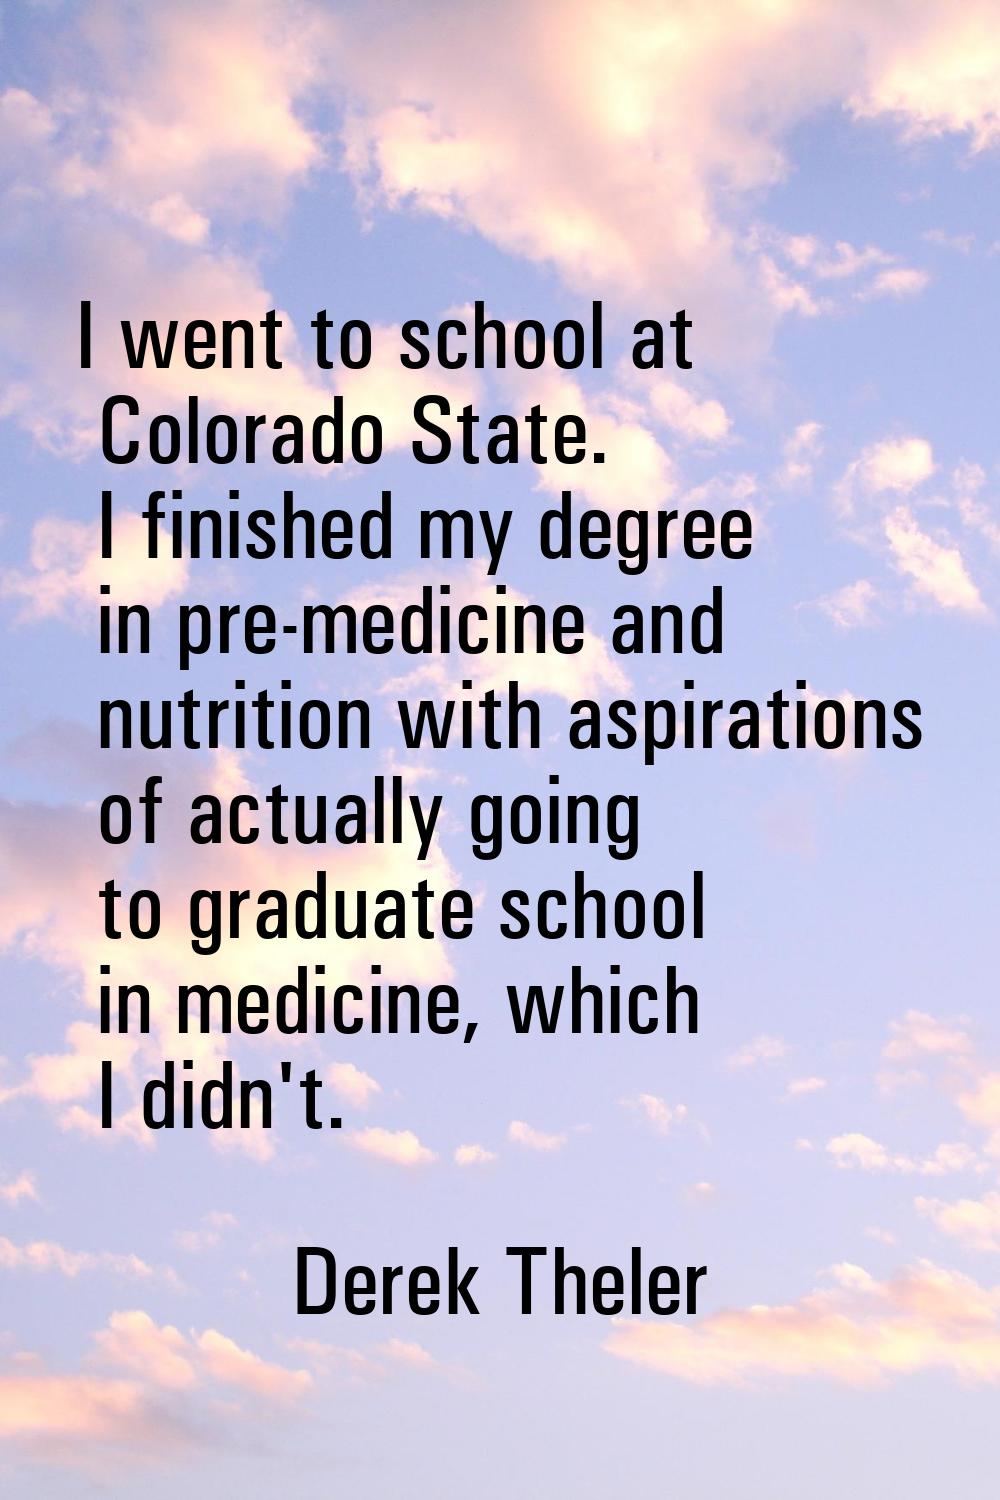 I went to school at Colorado State. I finished my degree in pre-medicine and nutrition with aspirat